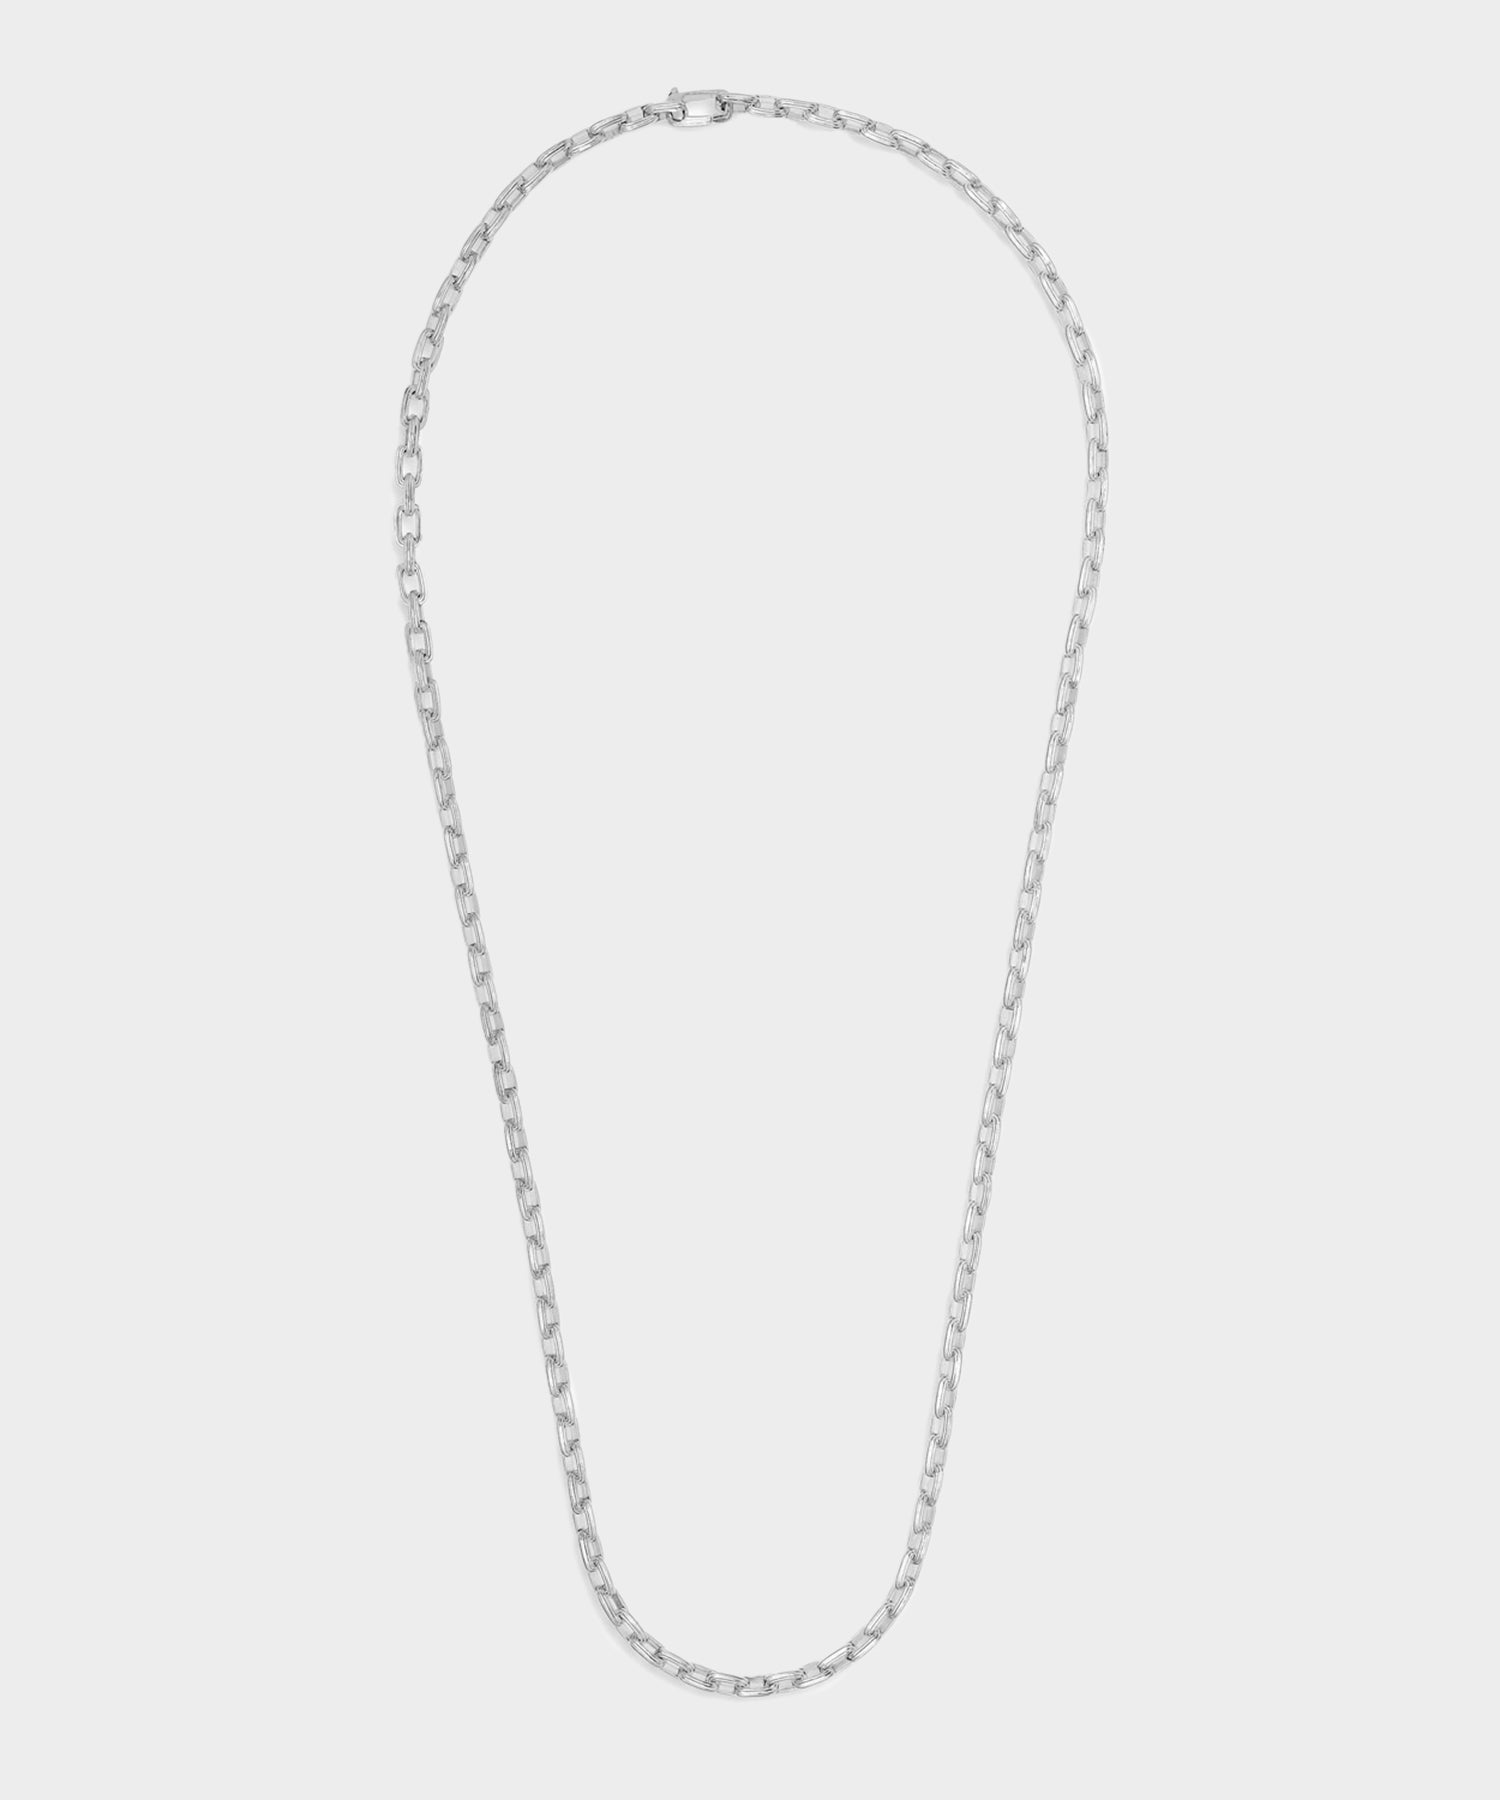 MAOR EQUINOX LINK NECKLACE IN 5MM STERLING SILVER